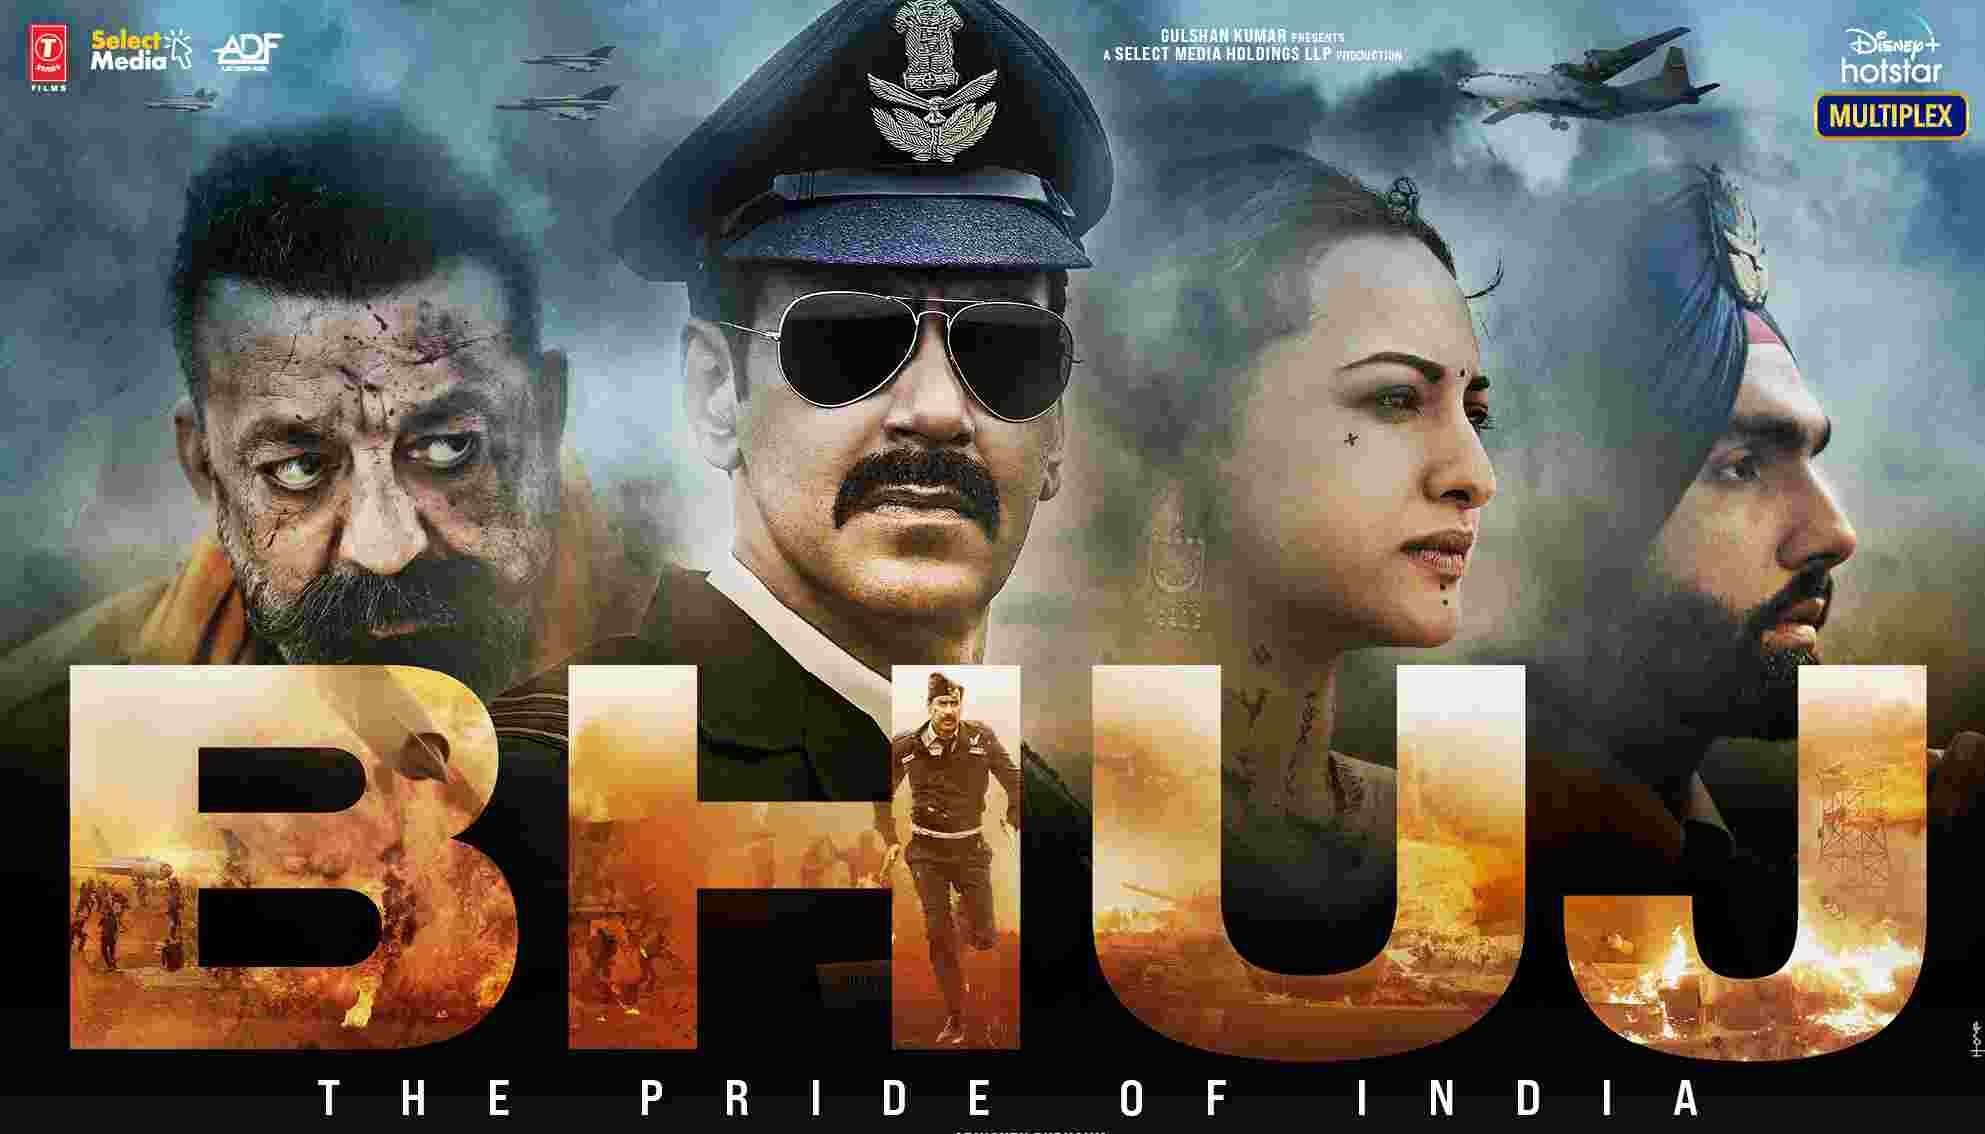 Teaser of Ajay Devgn's Bhuj The Pride of India released. Trailer on 12th July